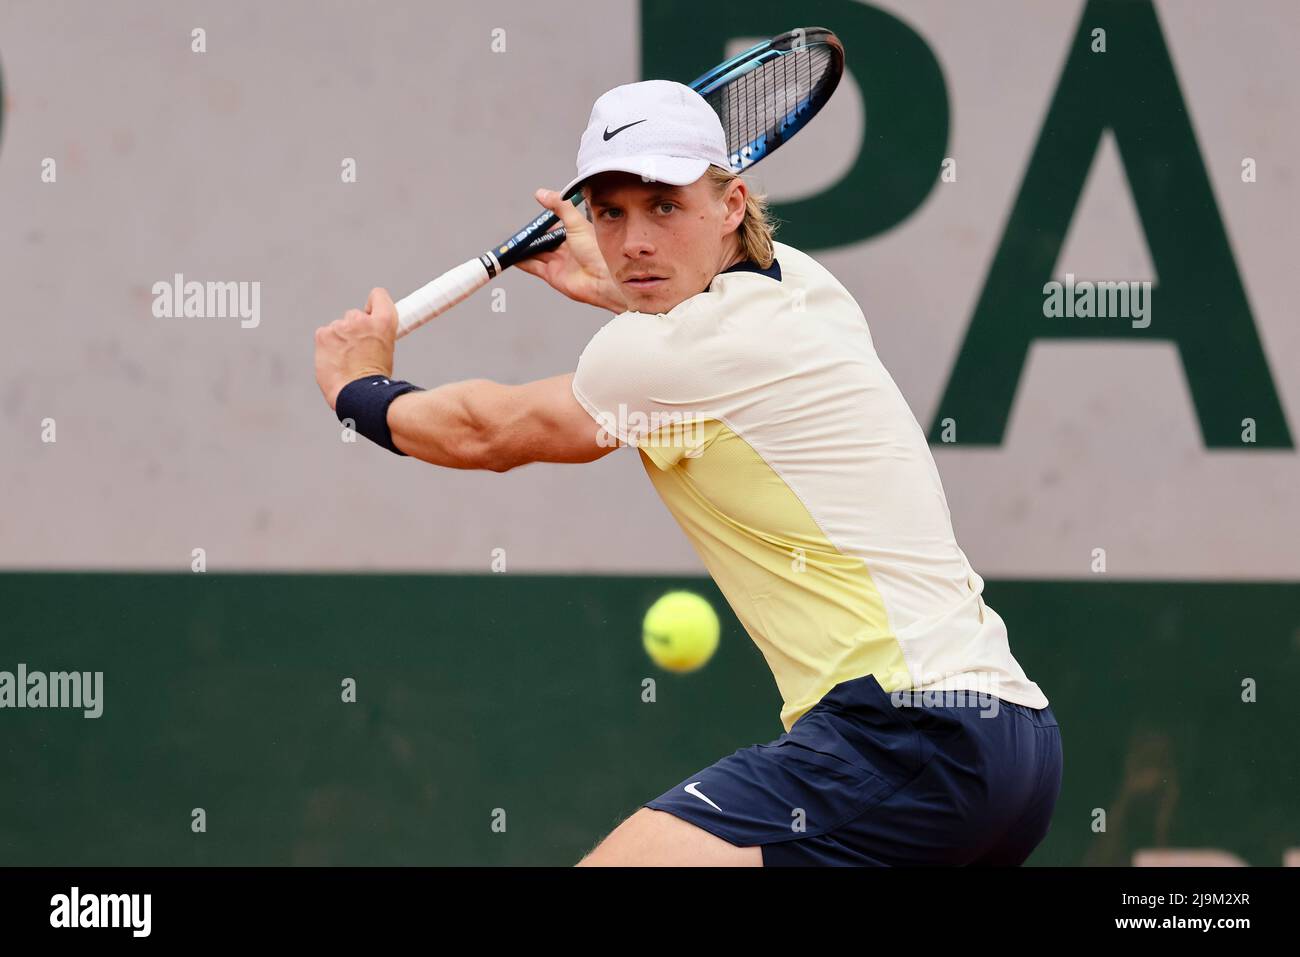 Paris, France. 24th May, 2022. Tennis player Denis Shapovalov from Canada  at the 2022 French Open Grand Slam tennis tournament in Roland Garros,  Paris, France. Frank Molter/Alamy Live news Stock Photo - Alamy